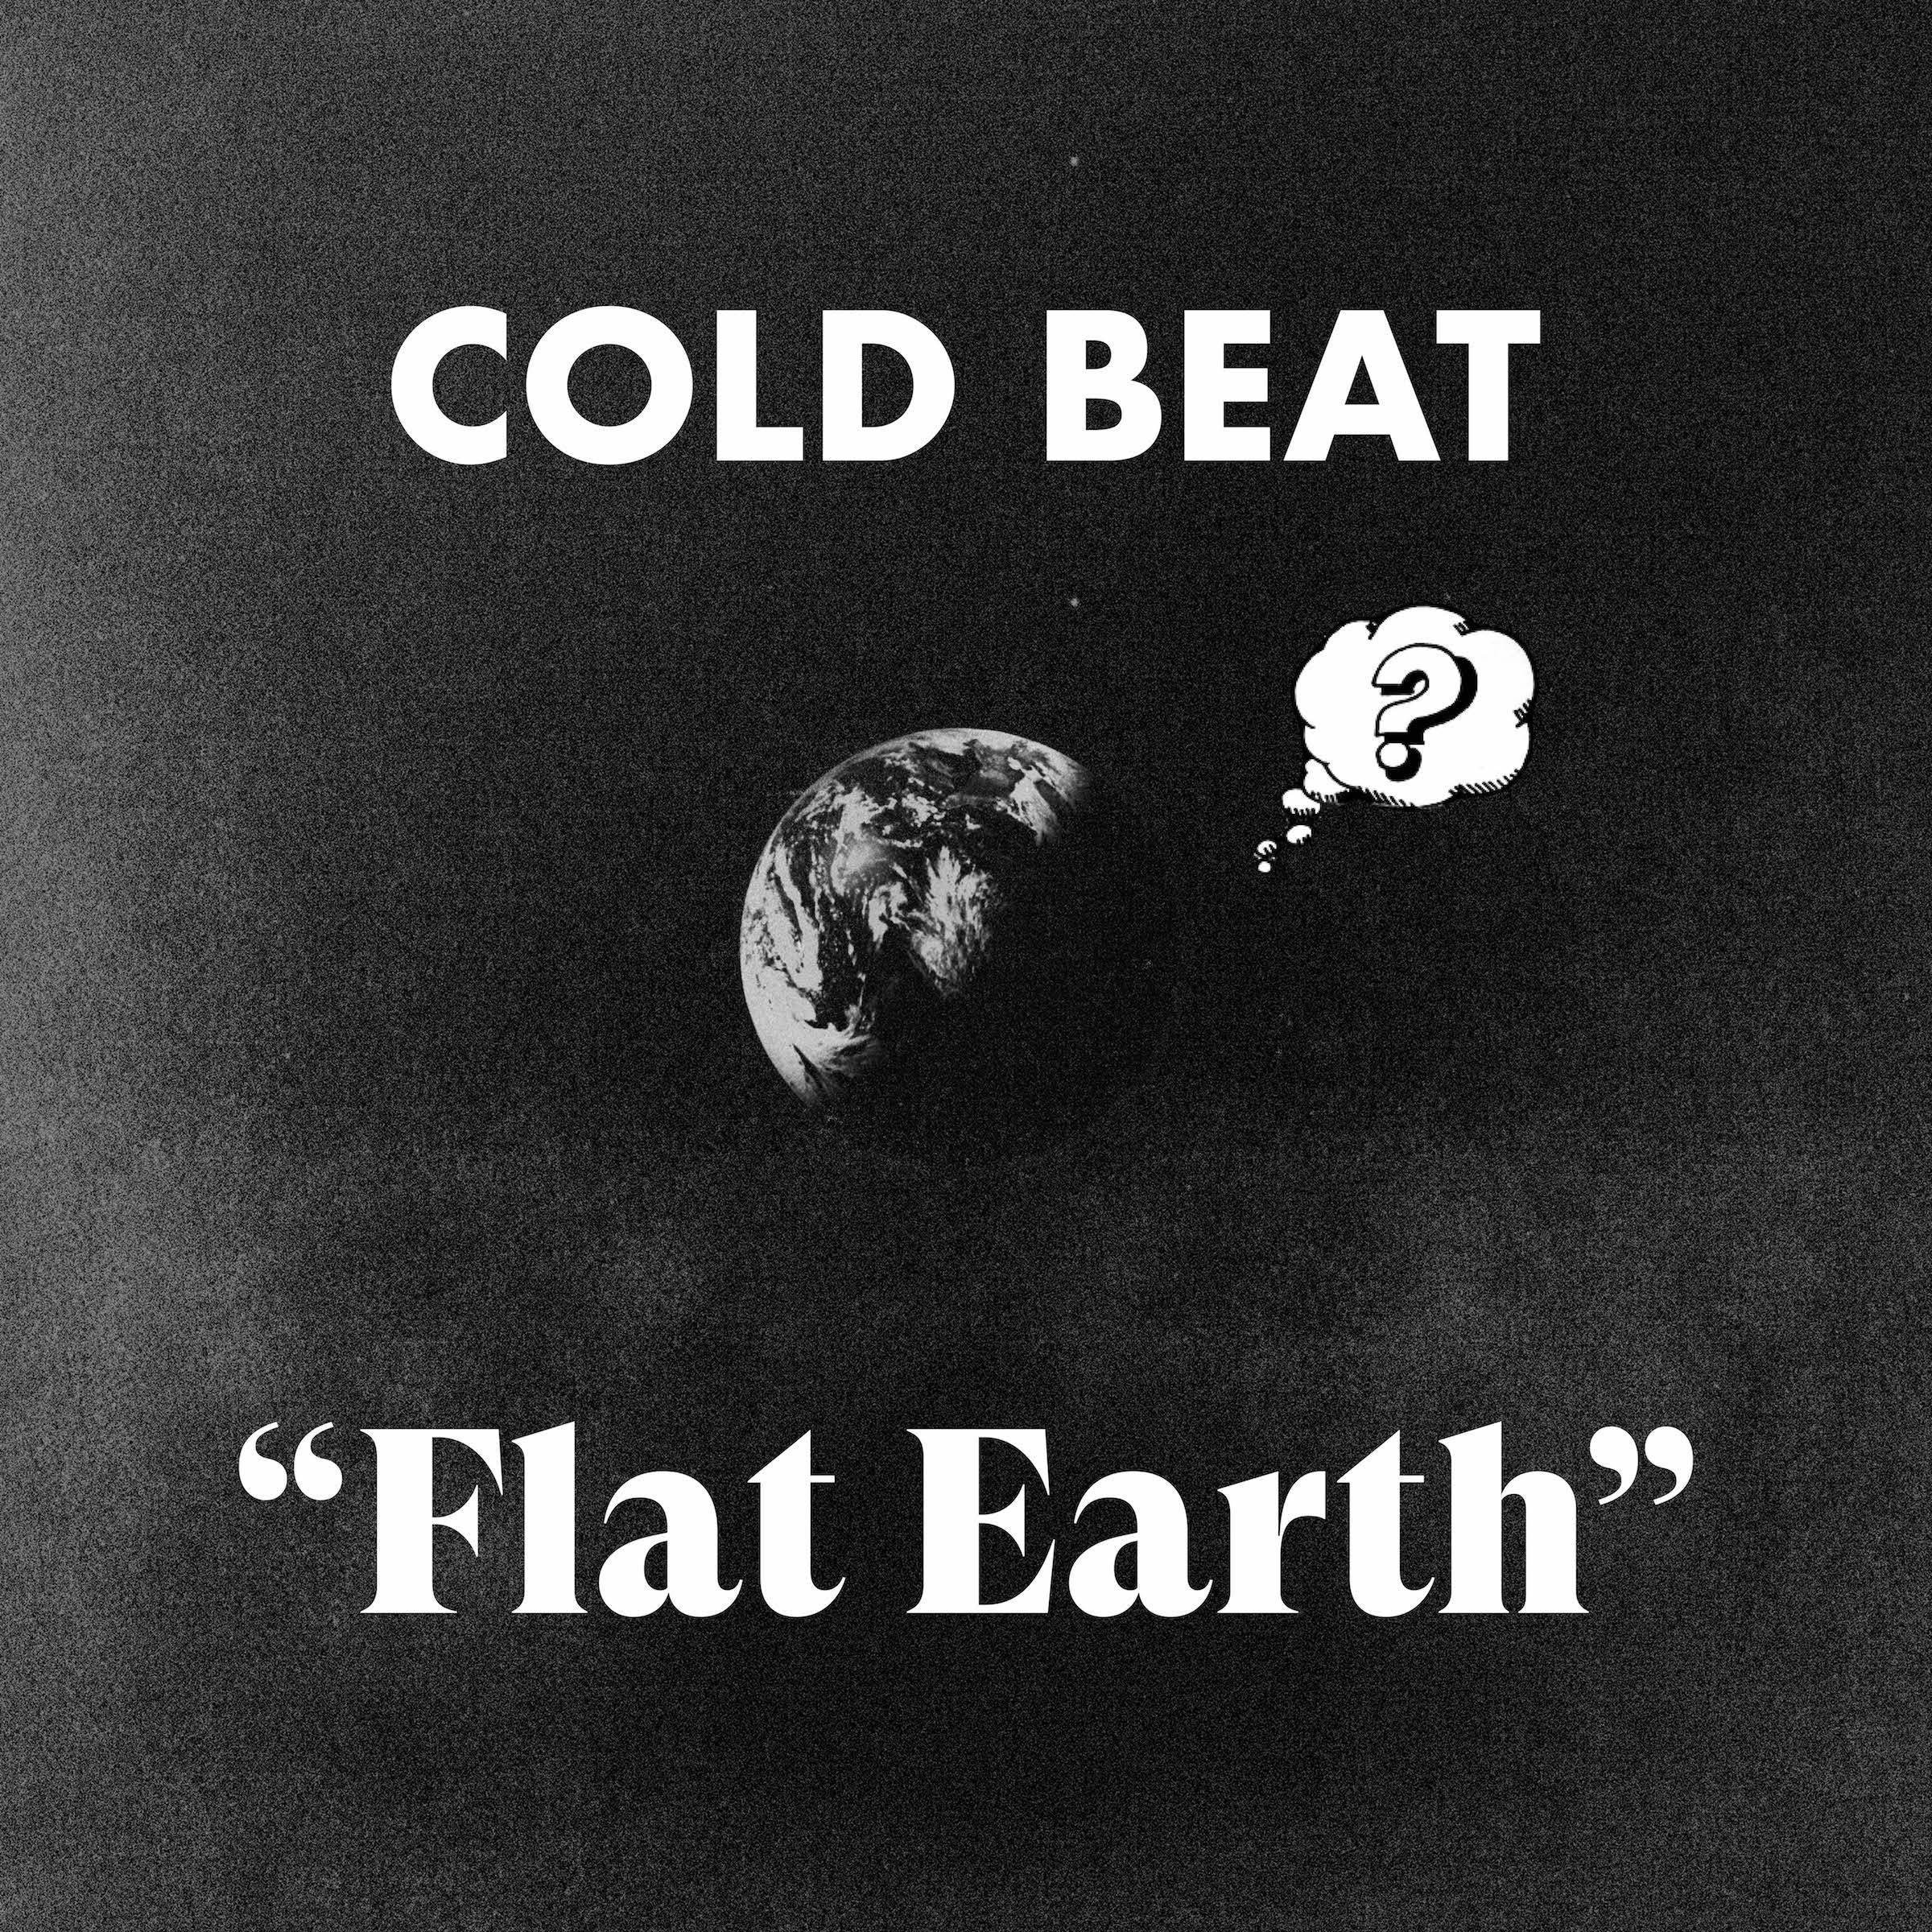 DFA Records signs Cold Beat, and release new single "Flat Earth"